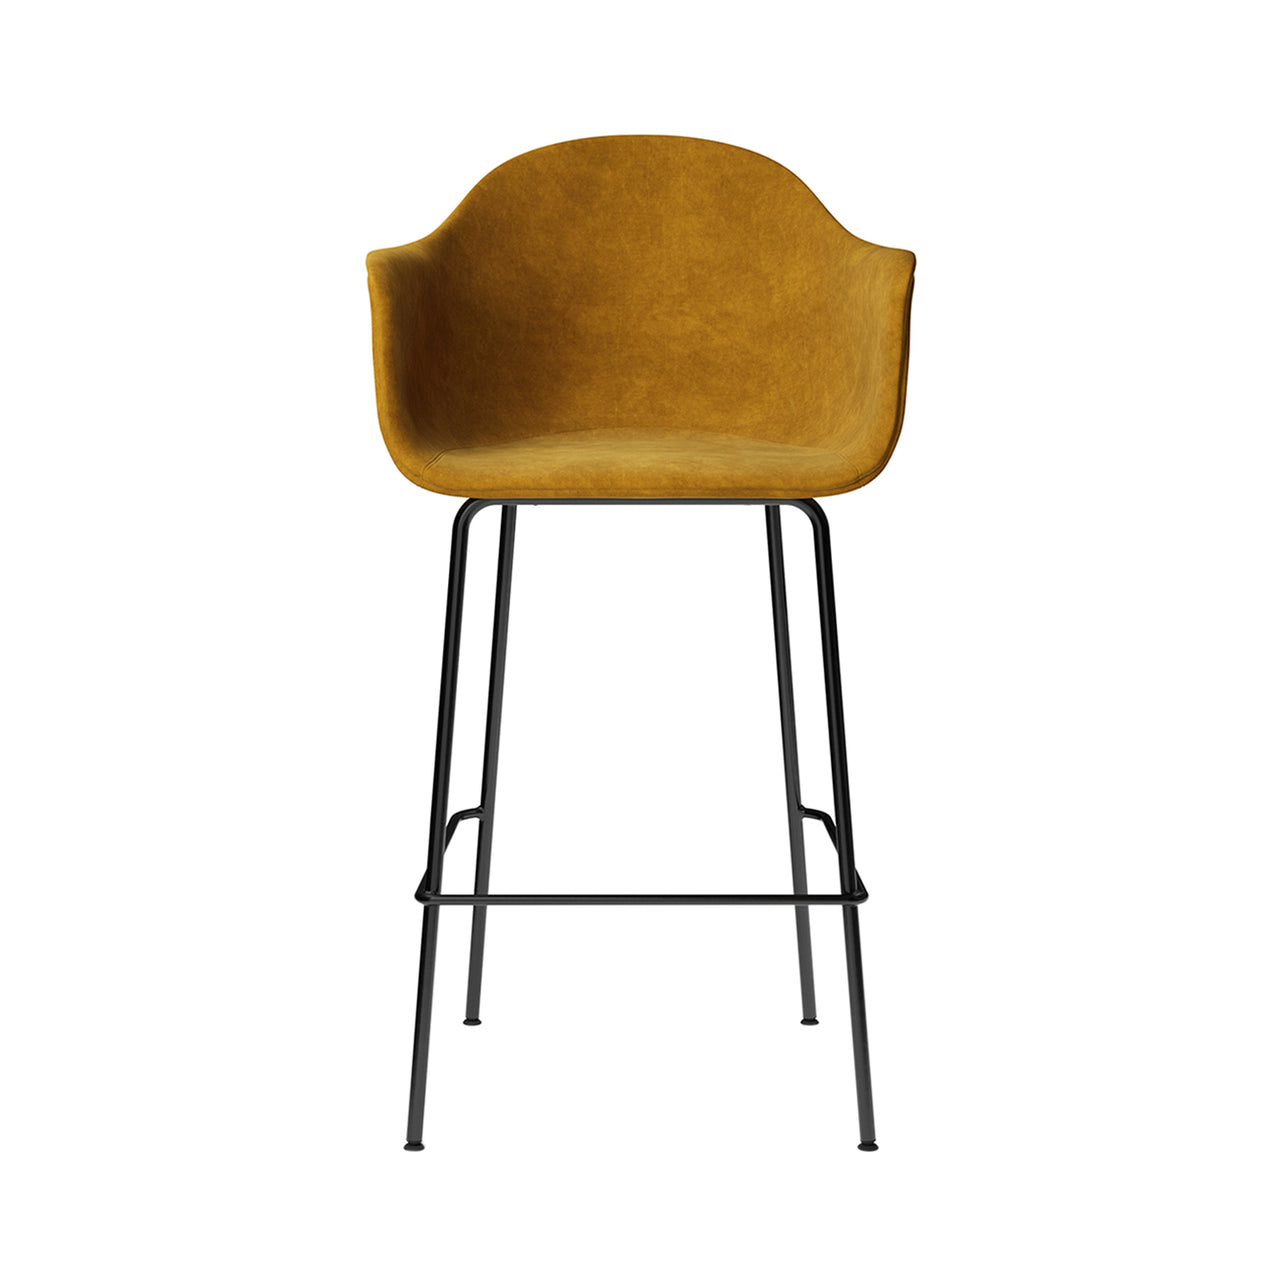 Harbour Bar + Counter Chair: Steel Base Upholstered + Bar + Champion 041